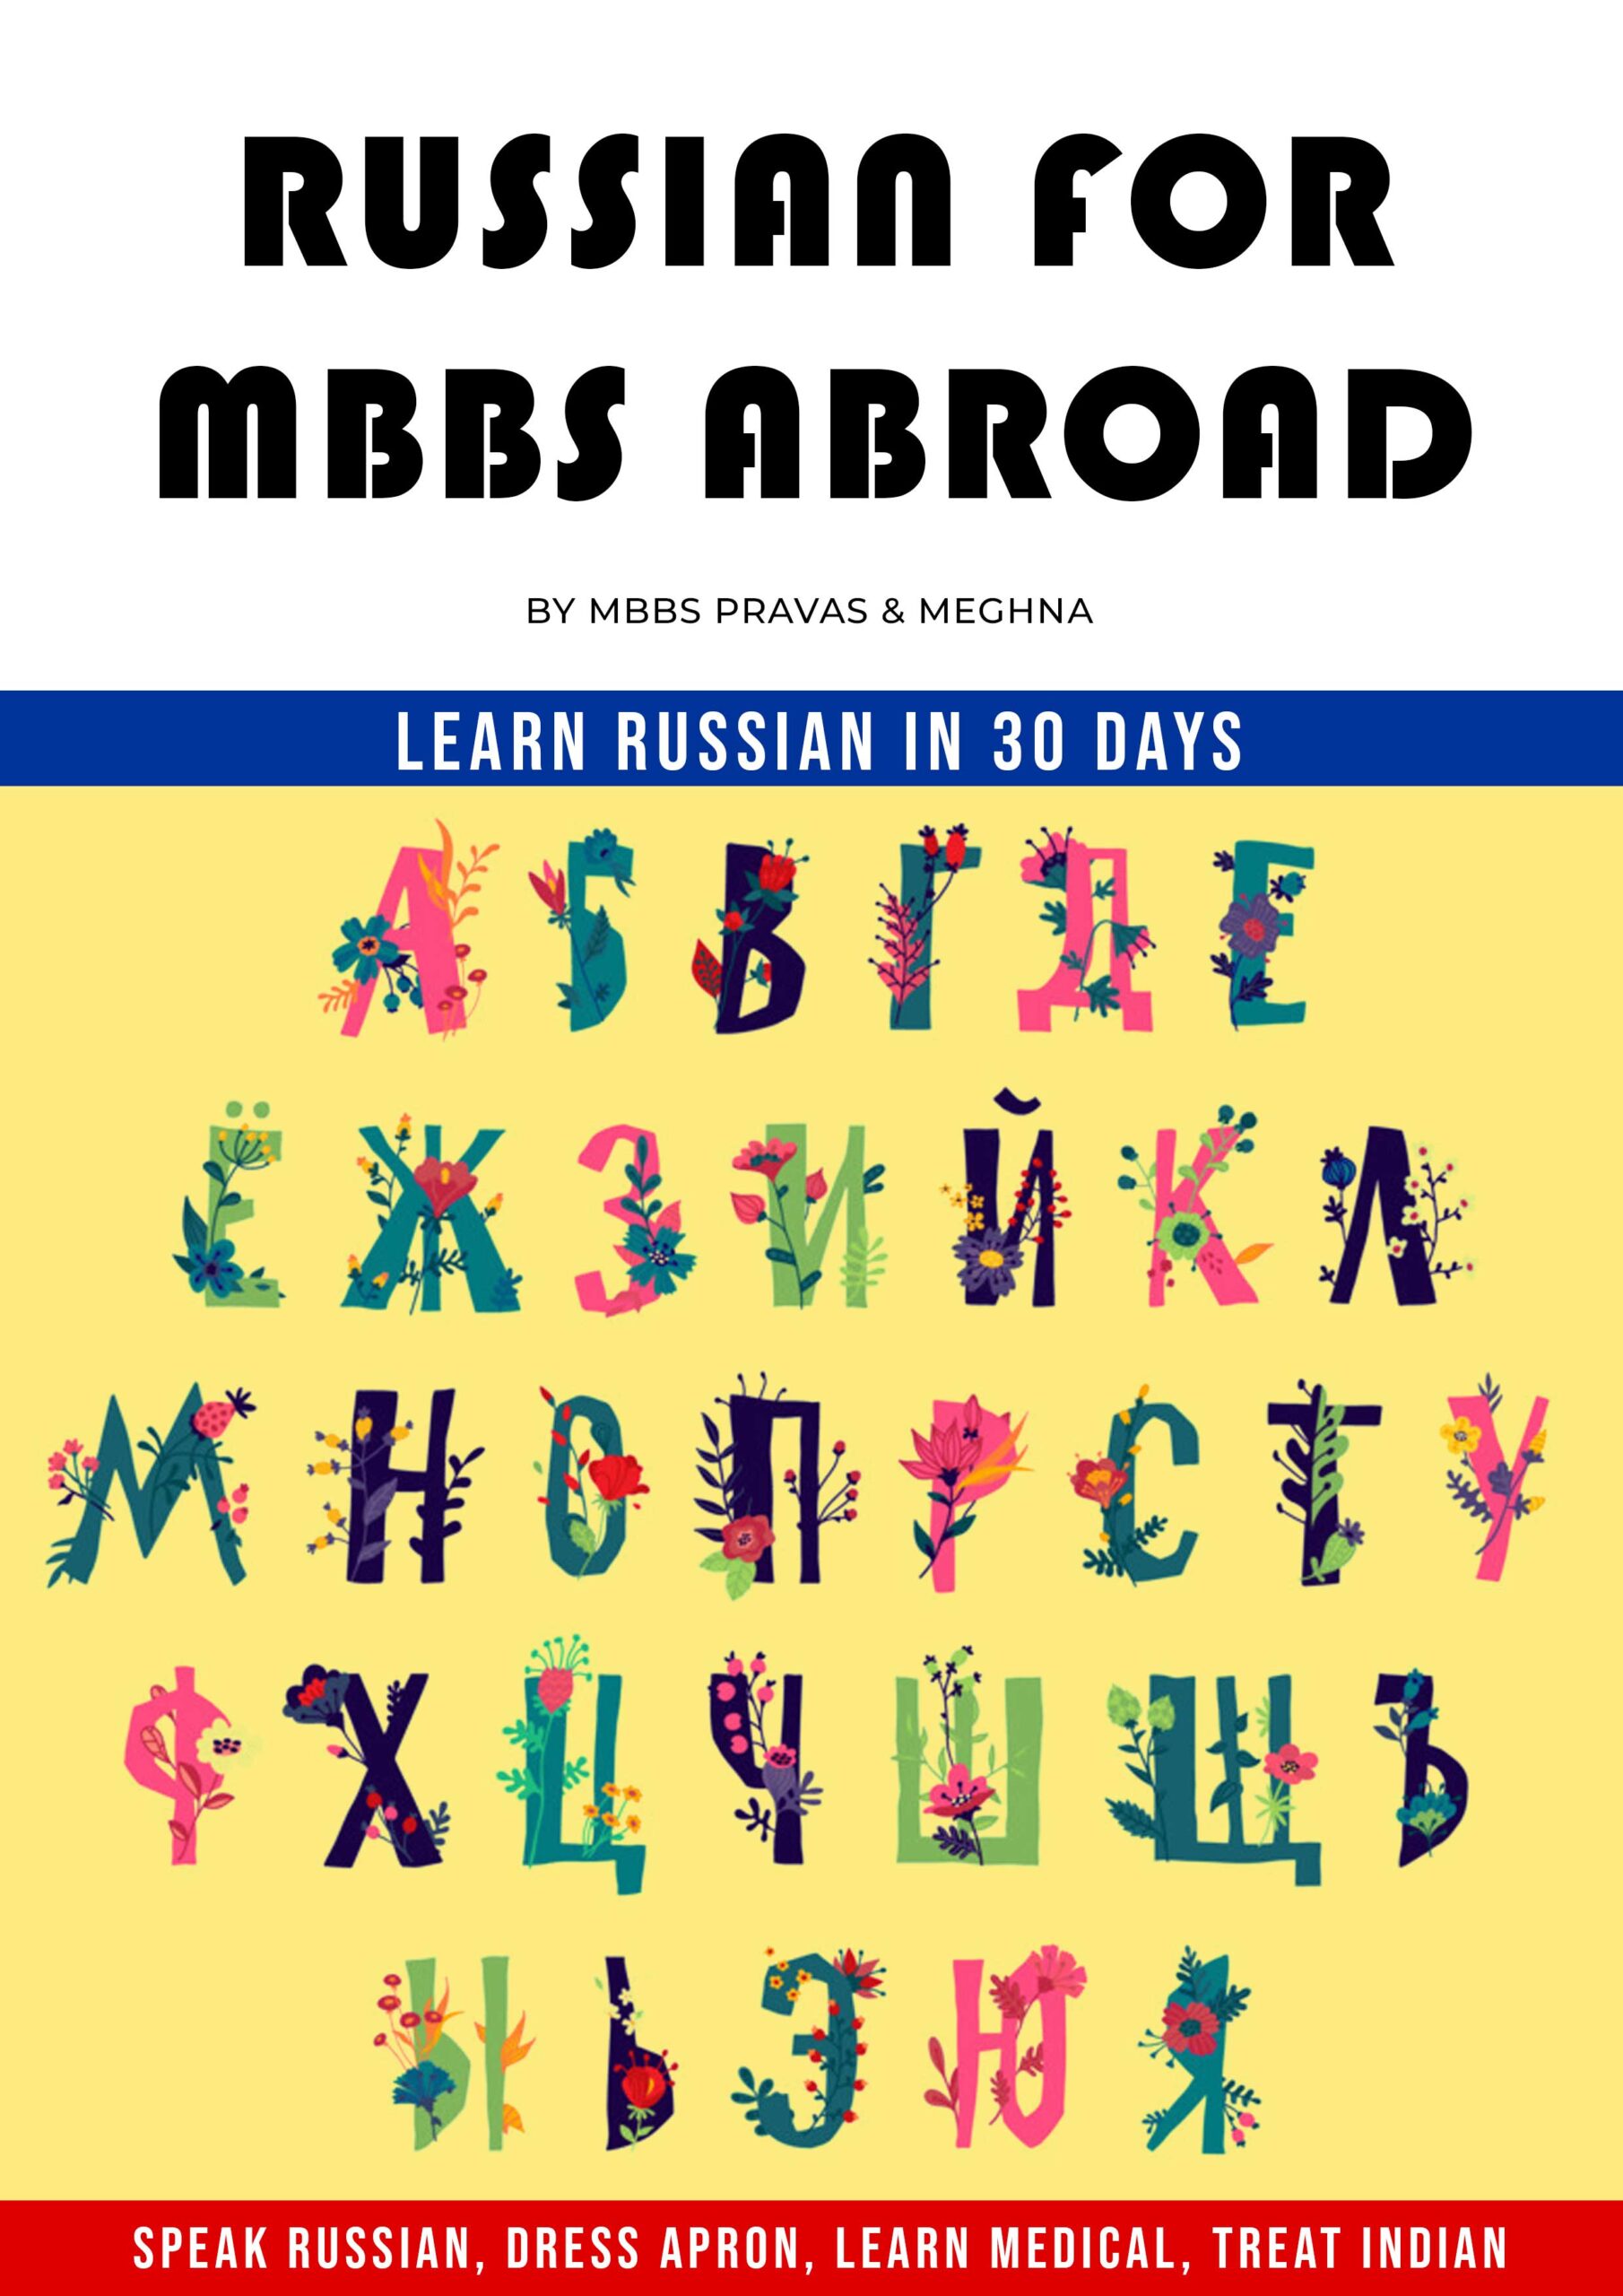 Russian For MBBS Abroad by MBBS Pravas